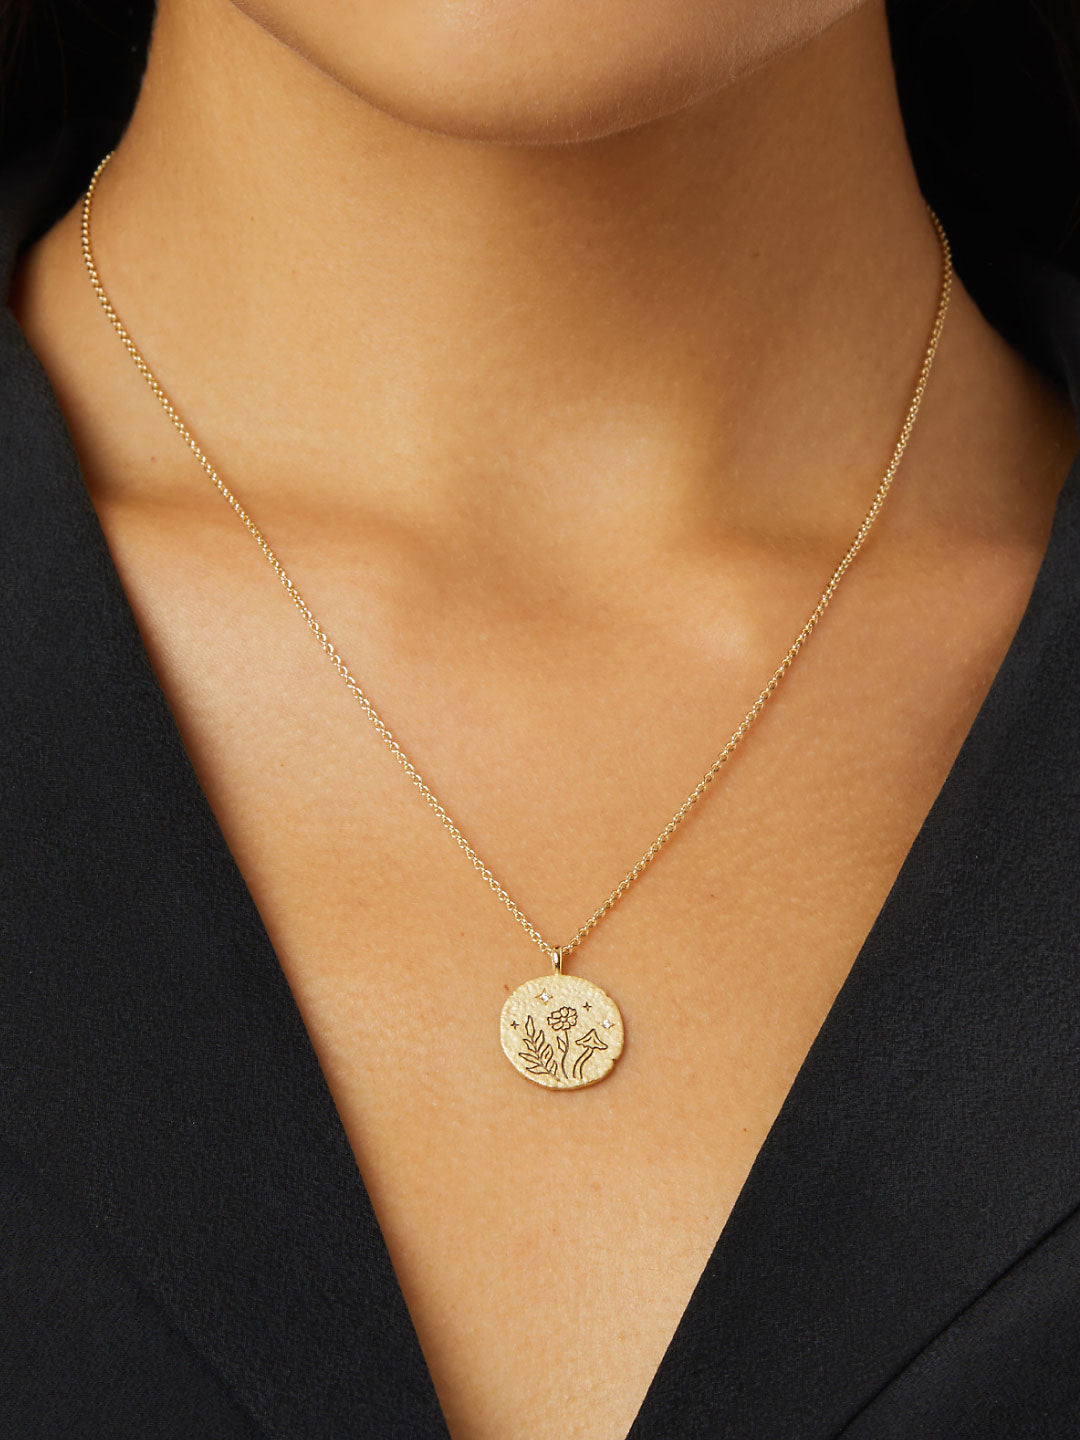 Ana Luisa Jewelry Necklaces Pendants Gold Coin Necklace Earth Pendant Gold